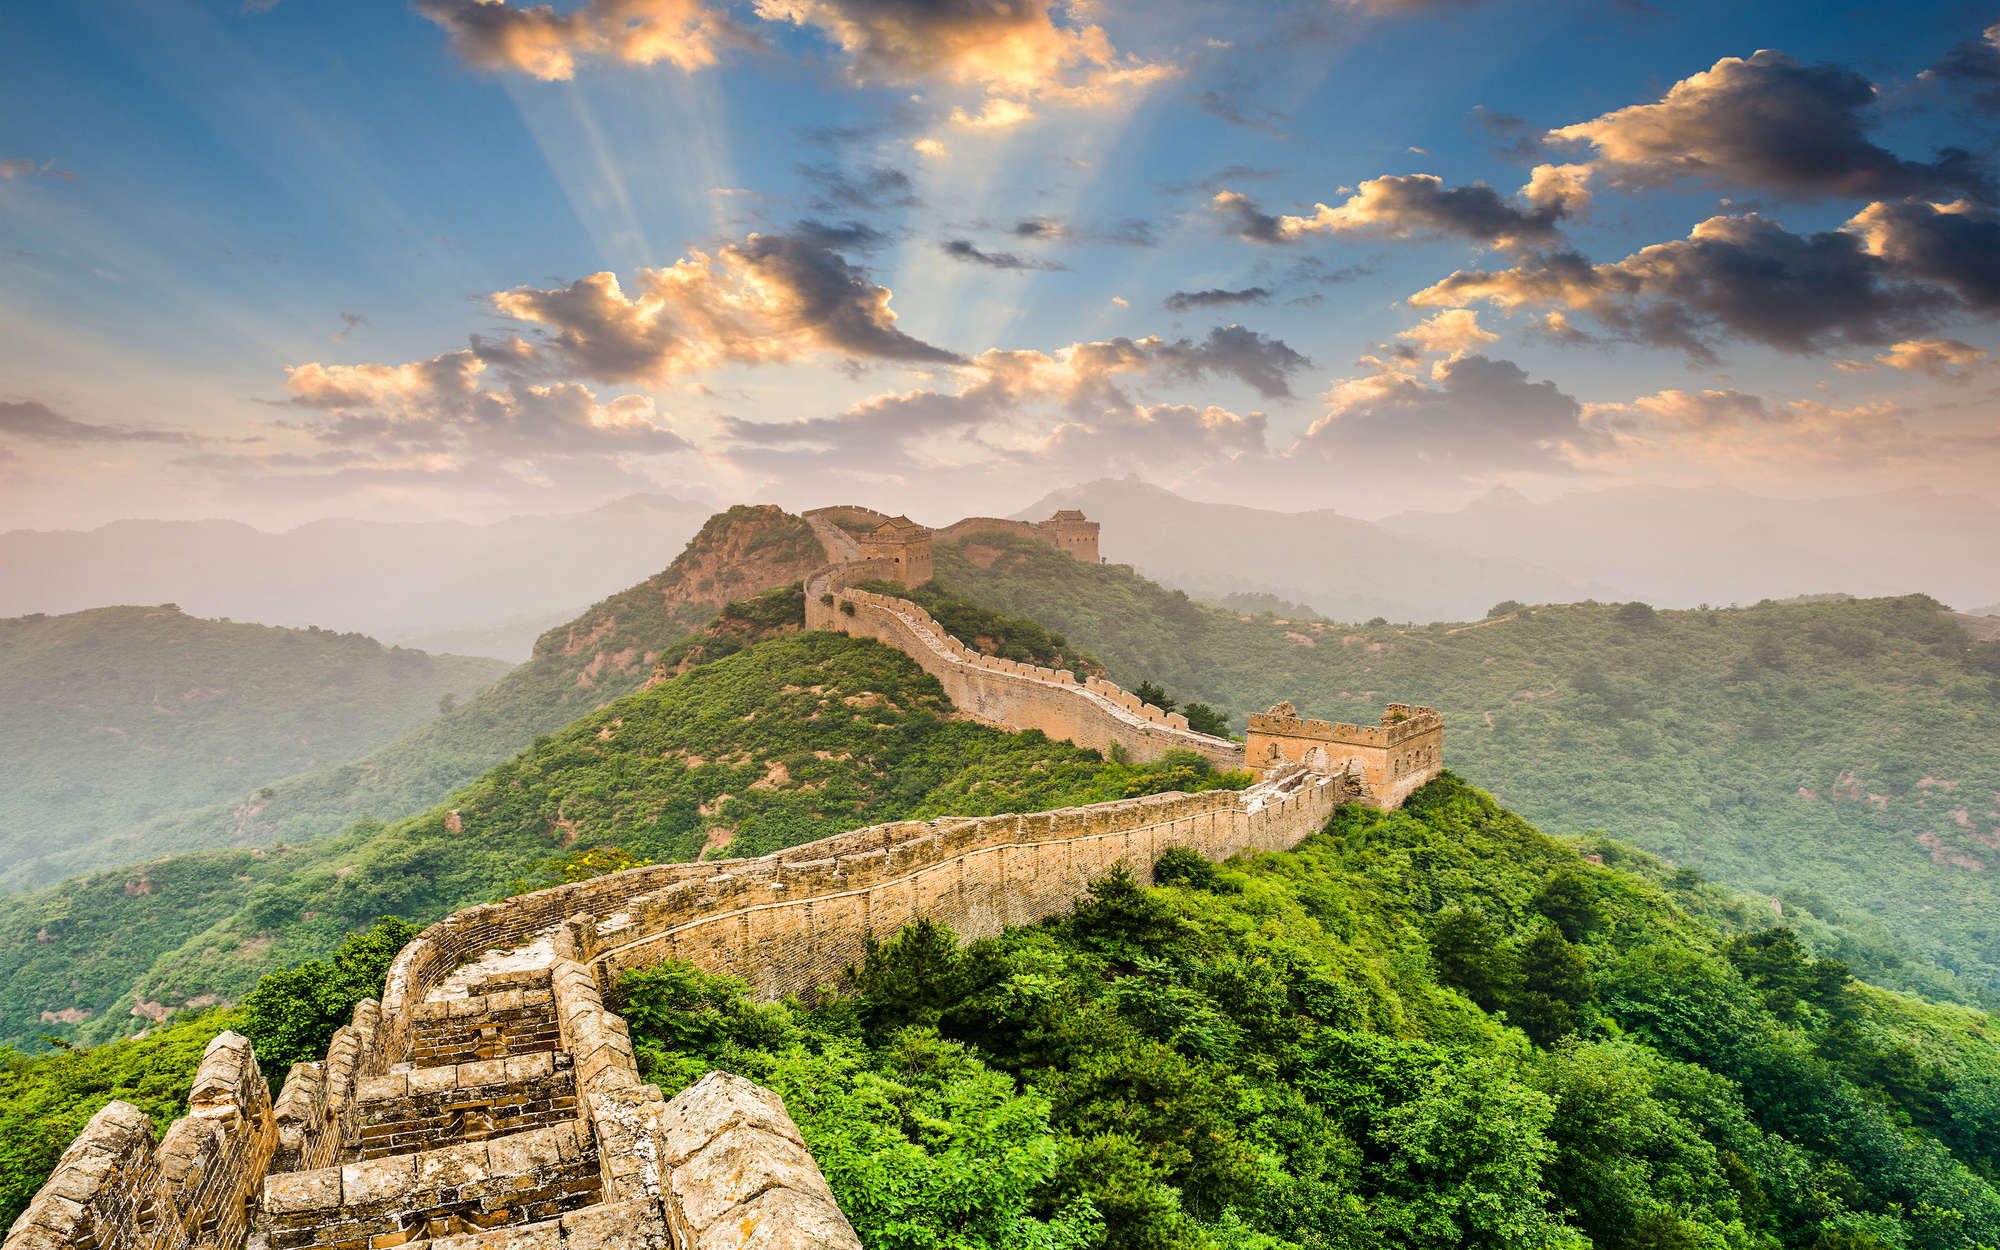             Photo wallpaper Chinese Wall in the sunshine - Premium smooth fleece
        